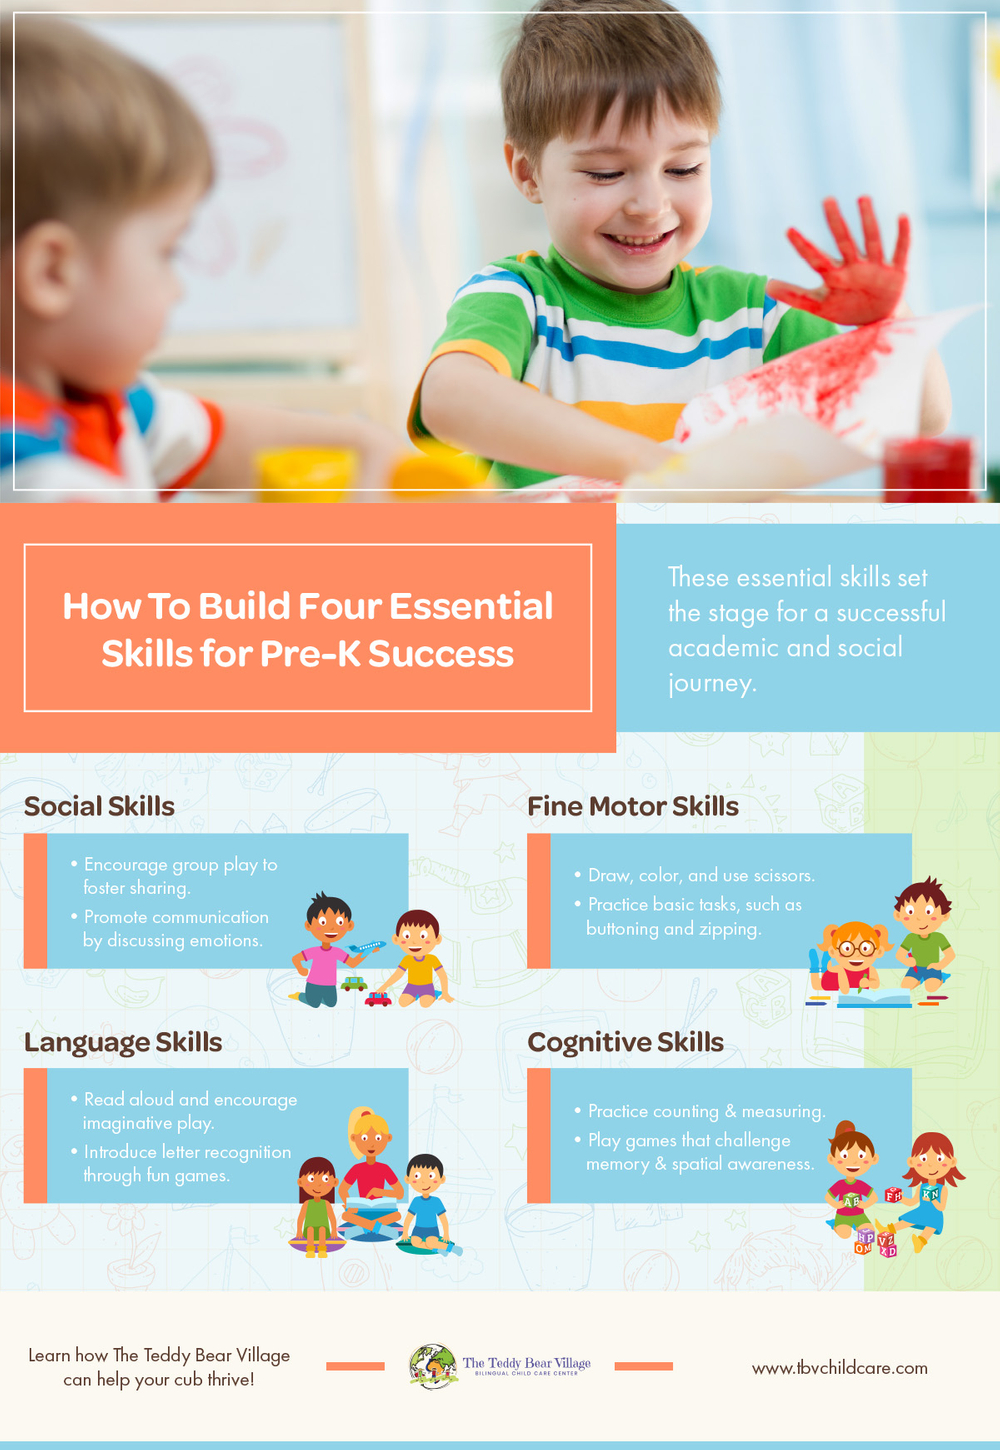 How To Build Four Essential Skills for Pre-K Success Infographic